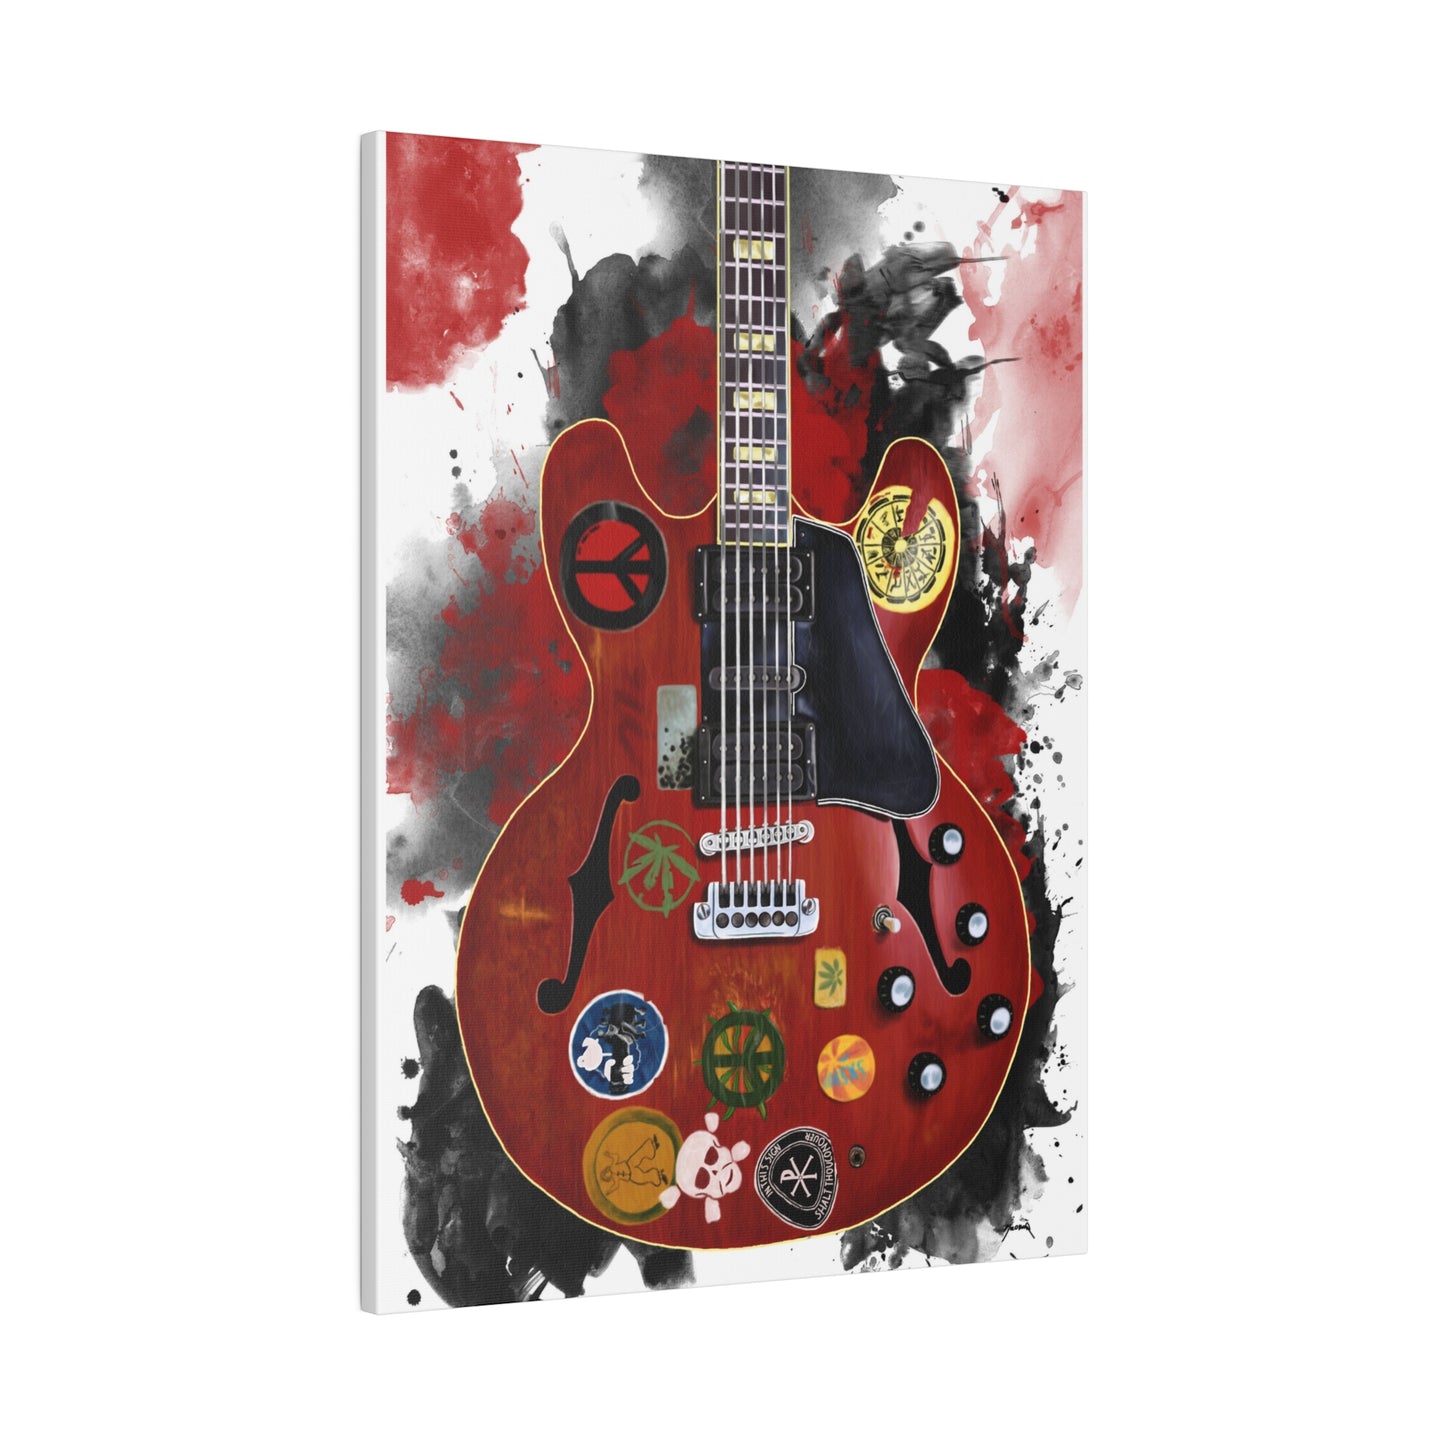 Alvin's guitar painting printed on canvas